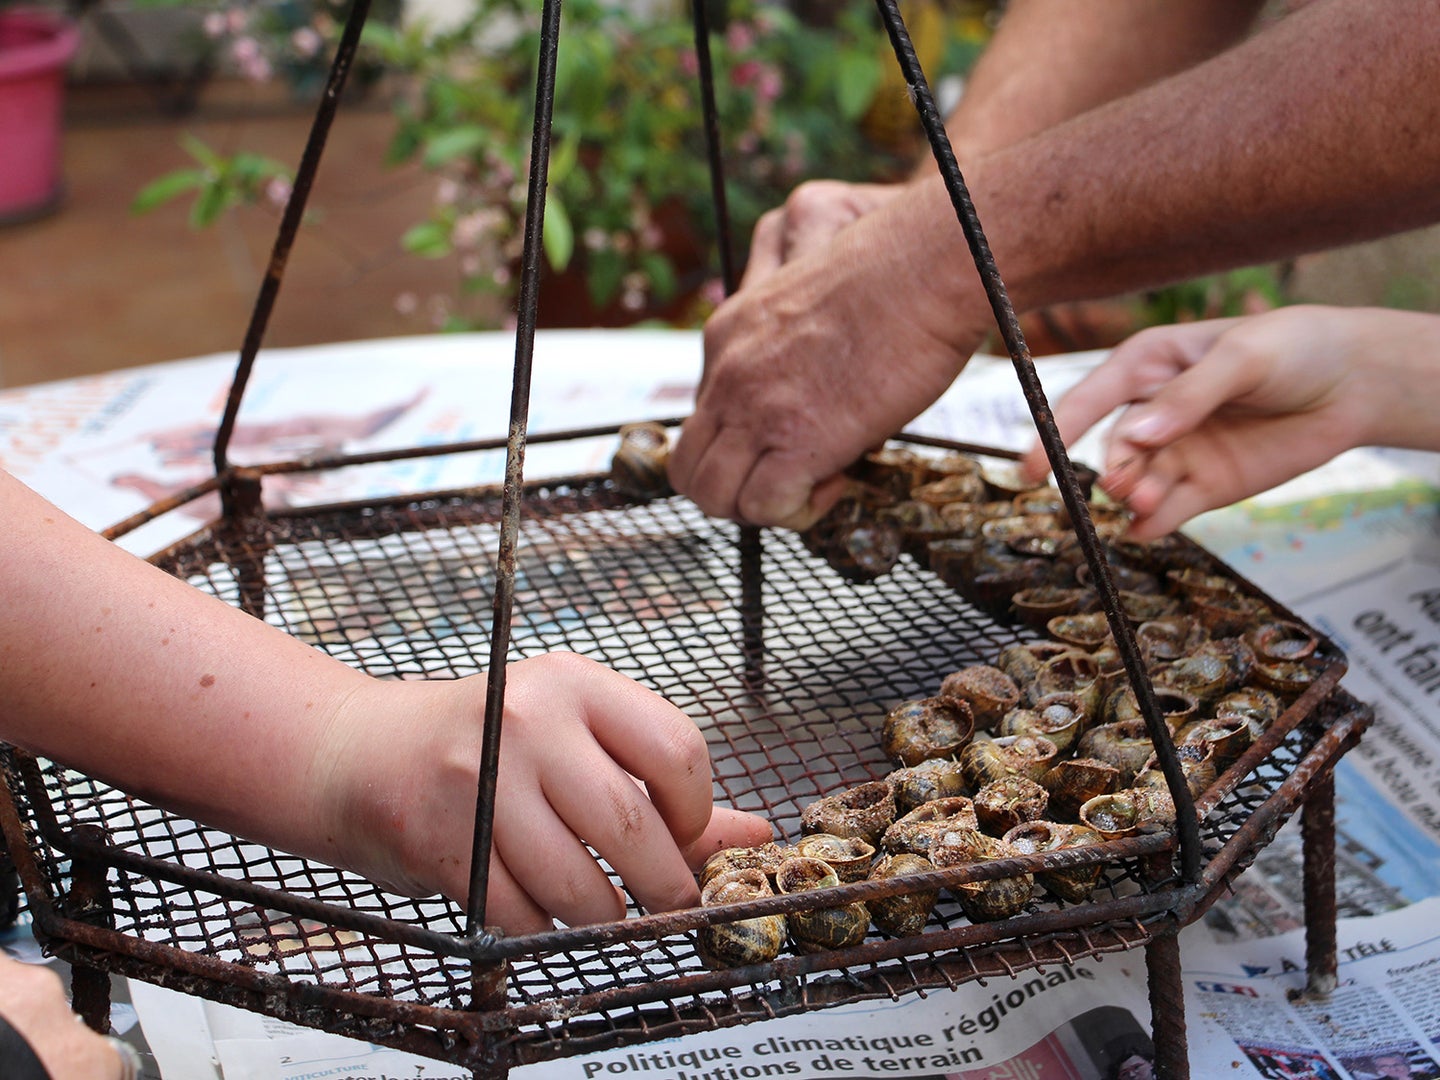 Snails are arranged on a grate for the grill.